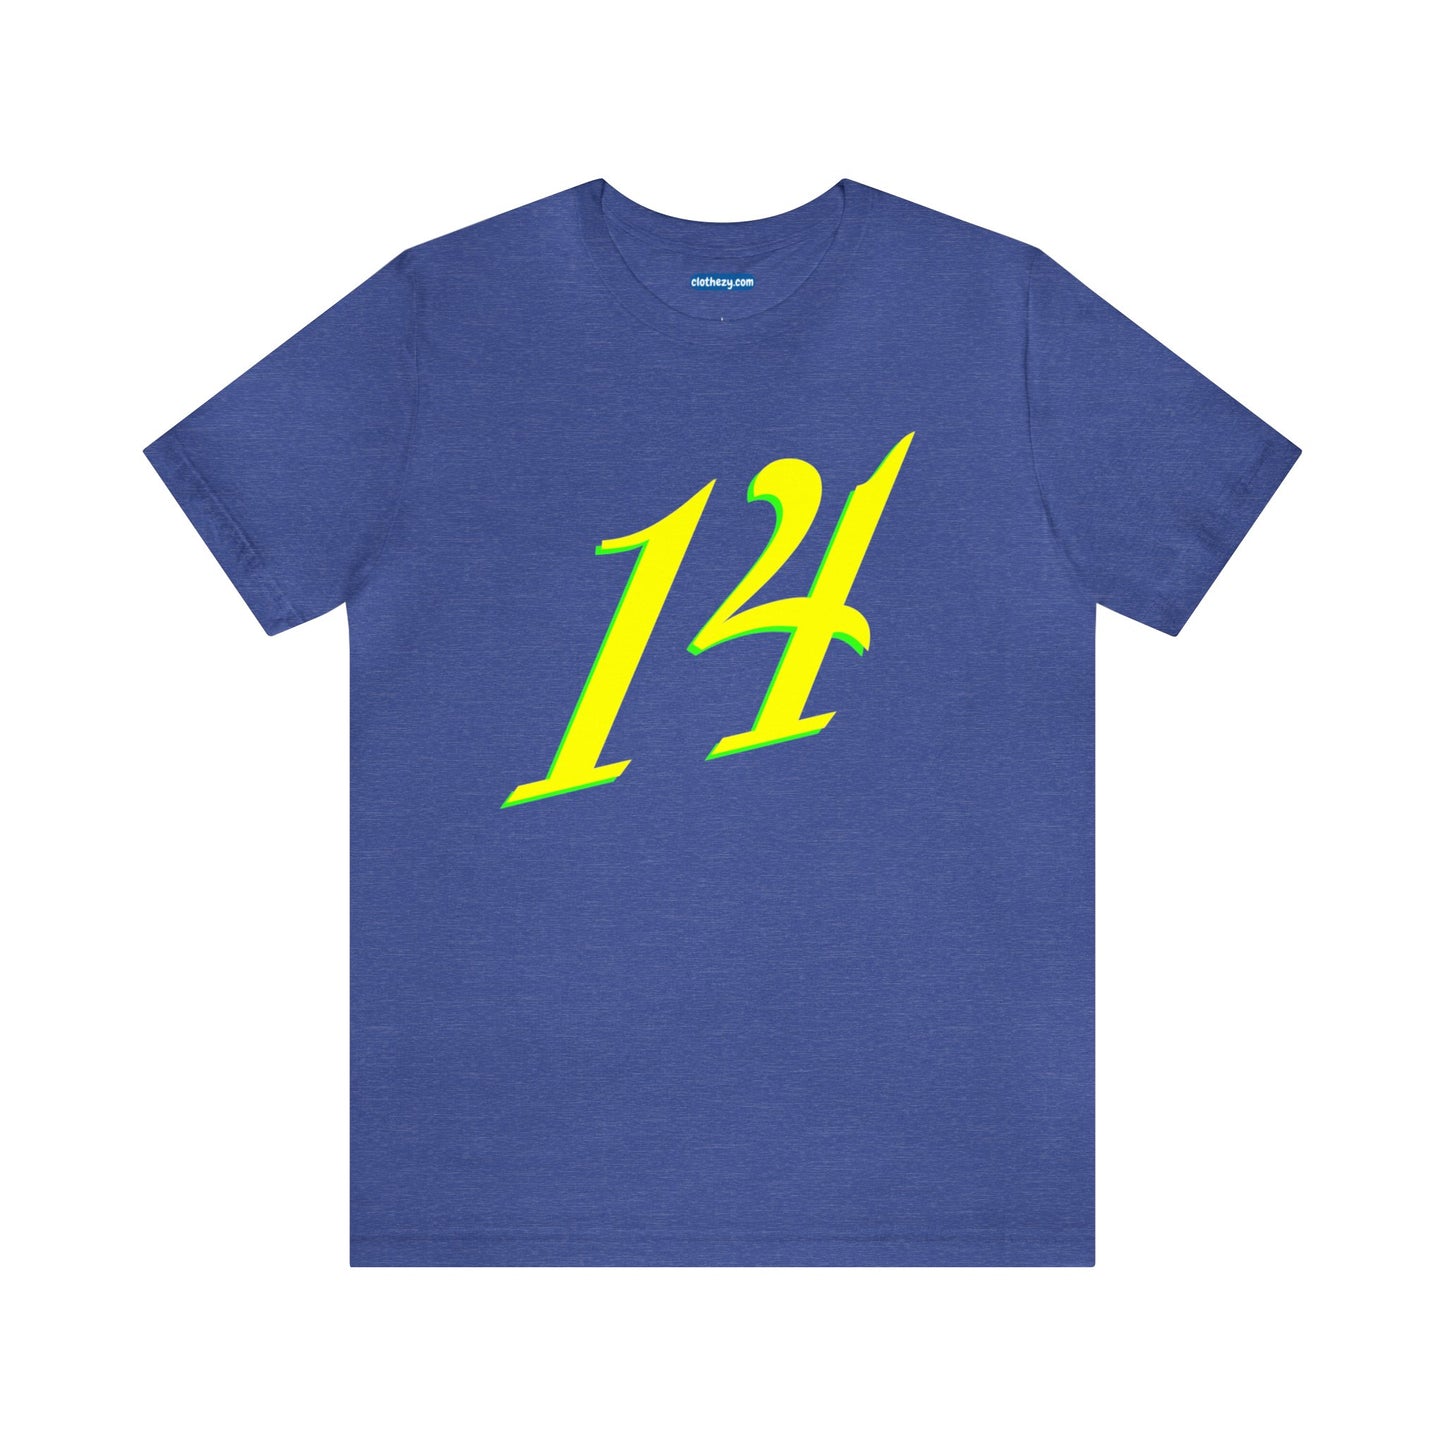 Number 14 Design - Soft Cotton Tee for birthdays and celebrations, Gift for friends and family, Multiple Options by clothezy.com in Navy Size Small - Buy Now